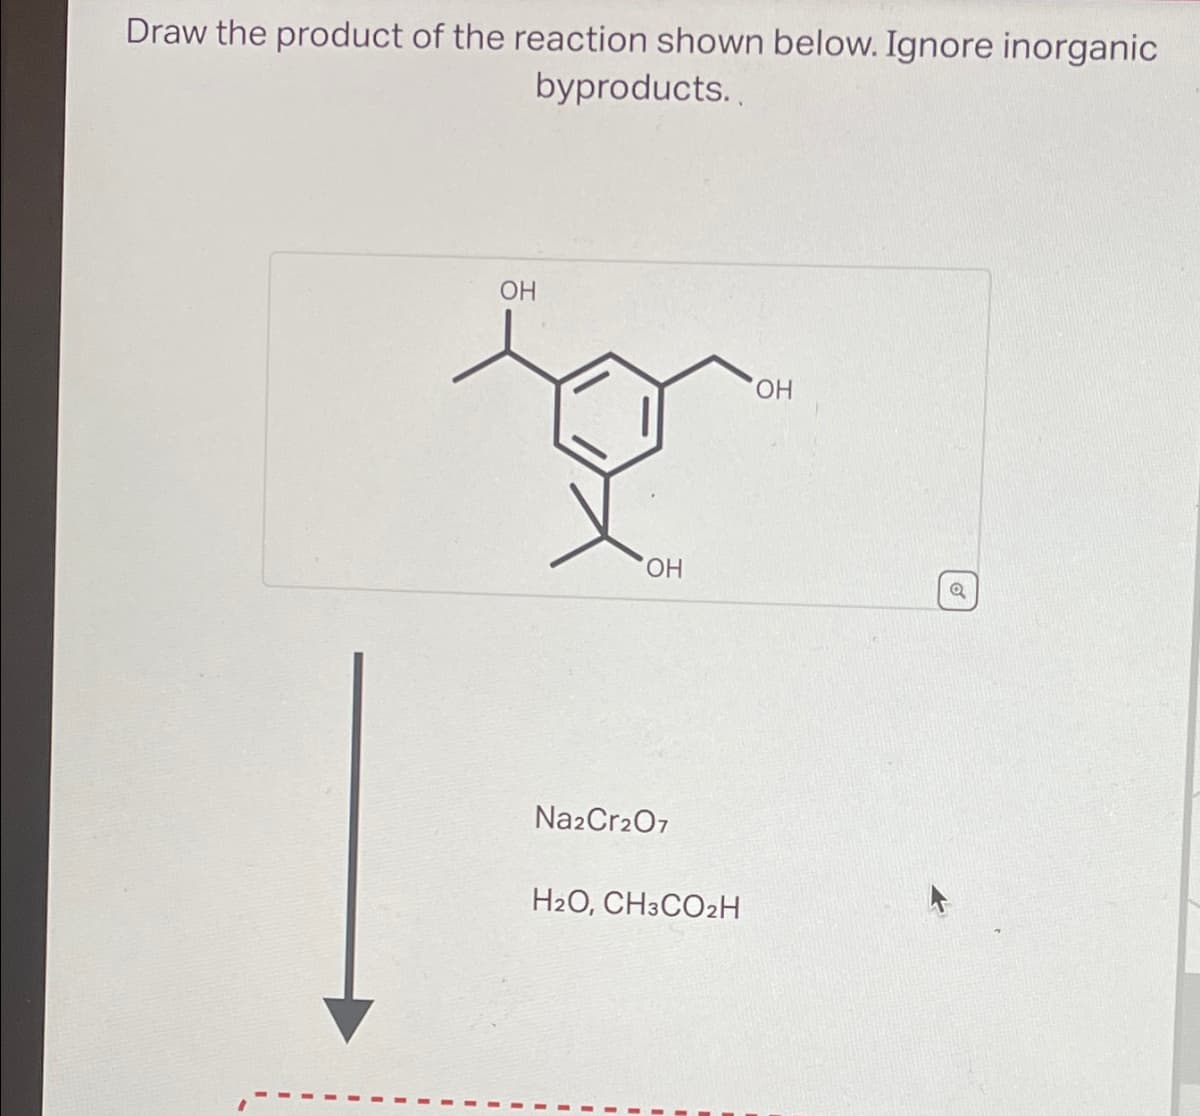 Draw the product of the reaction shown below. Ignore inorganic
byproducts..
OH
to
OH
Na2Cr2O7
H2O, CH3CO2H
OH
Q